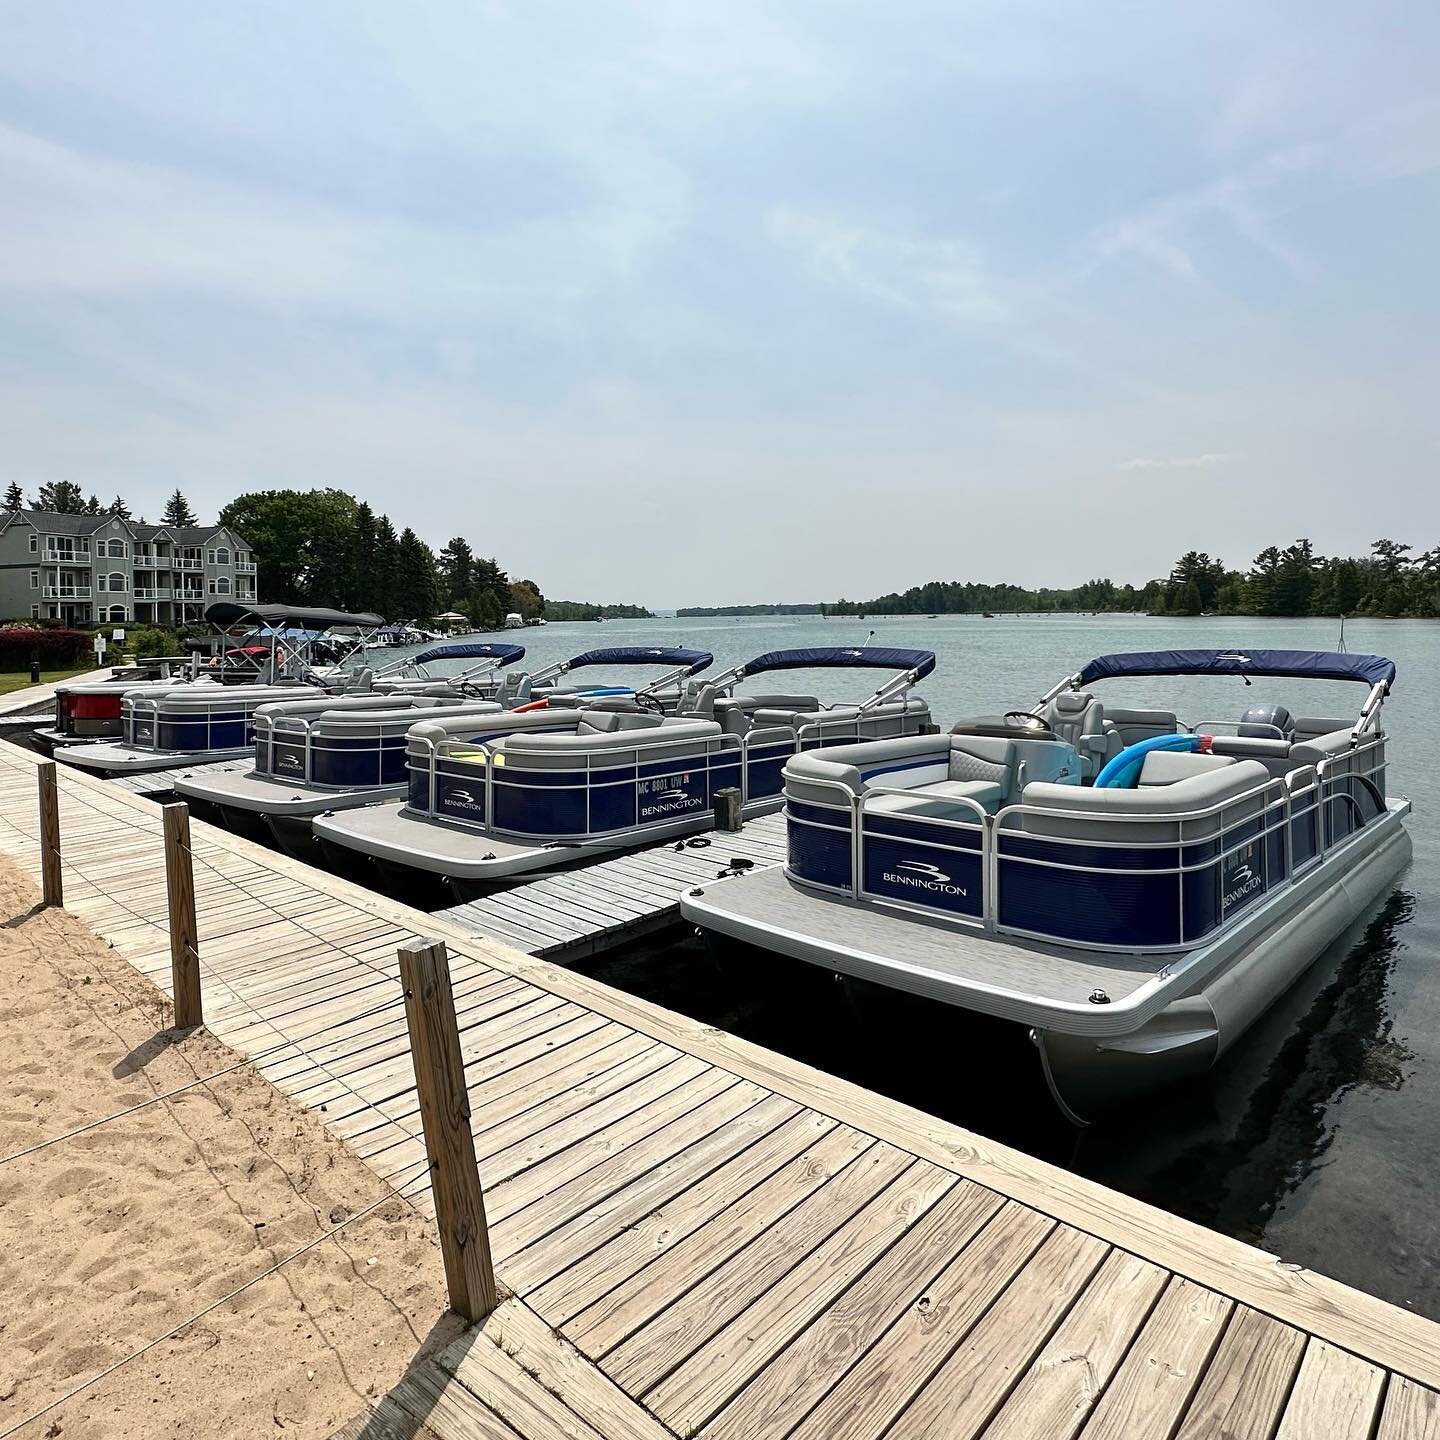 We just launched our new boat rental service! We have 4 brand new Bennington Pontoons available for full day or 1/2 day rentals. Book online at riverwalkelkrapids.com⛵️